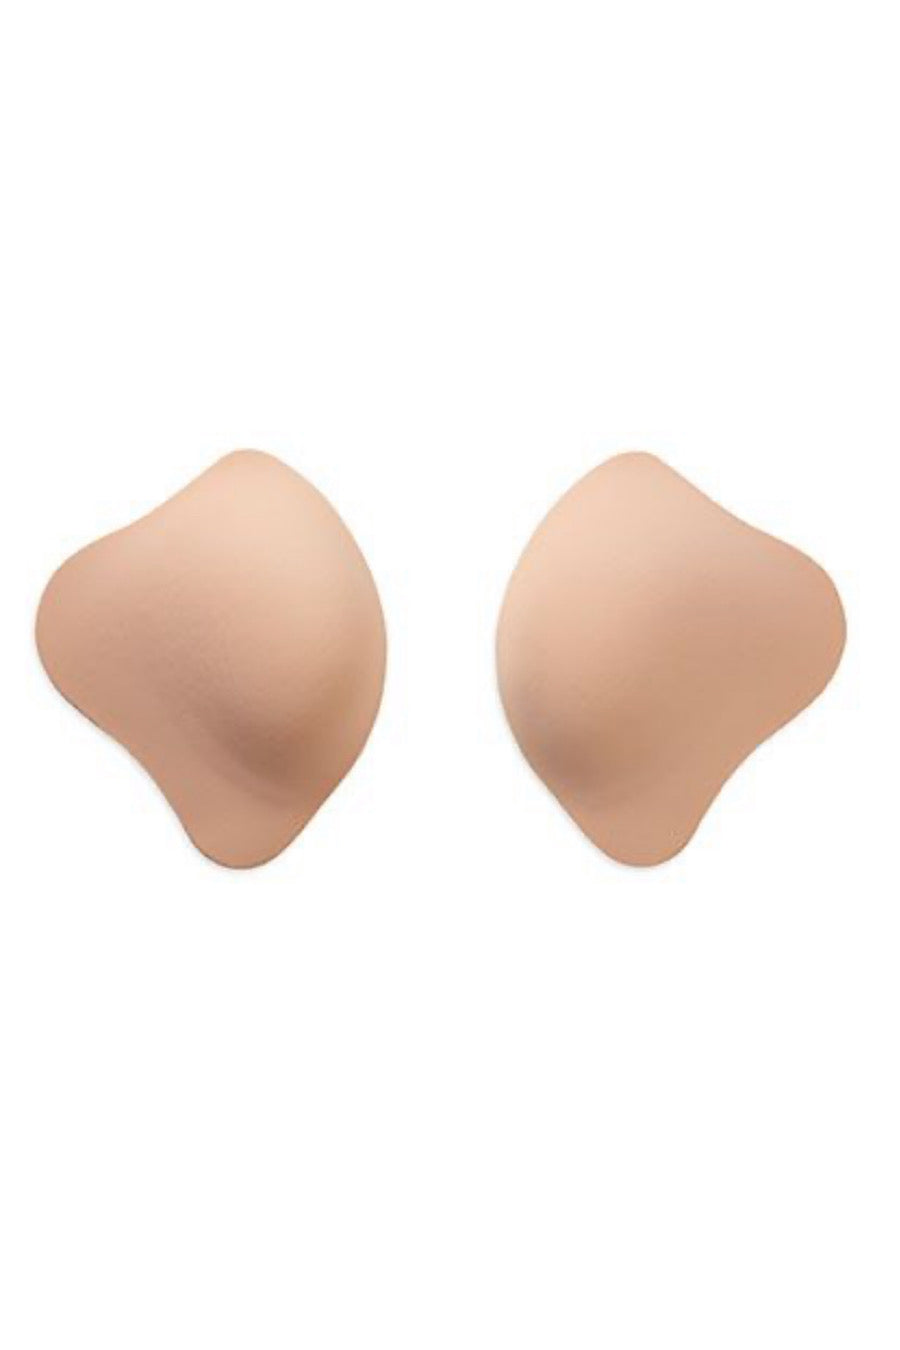 Silicone Contour Cups in B, C, D